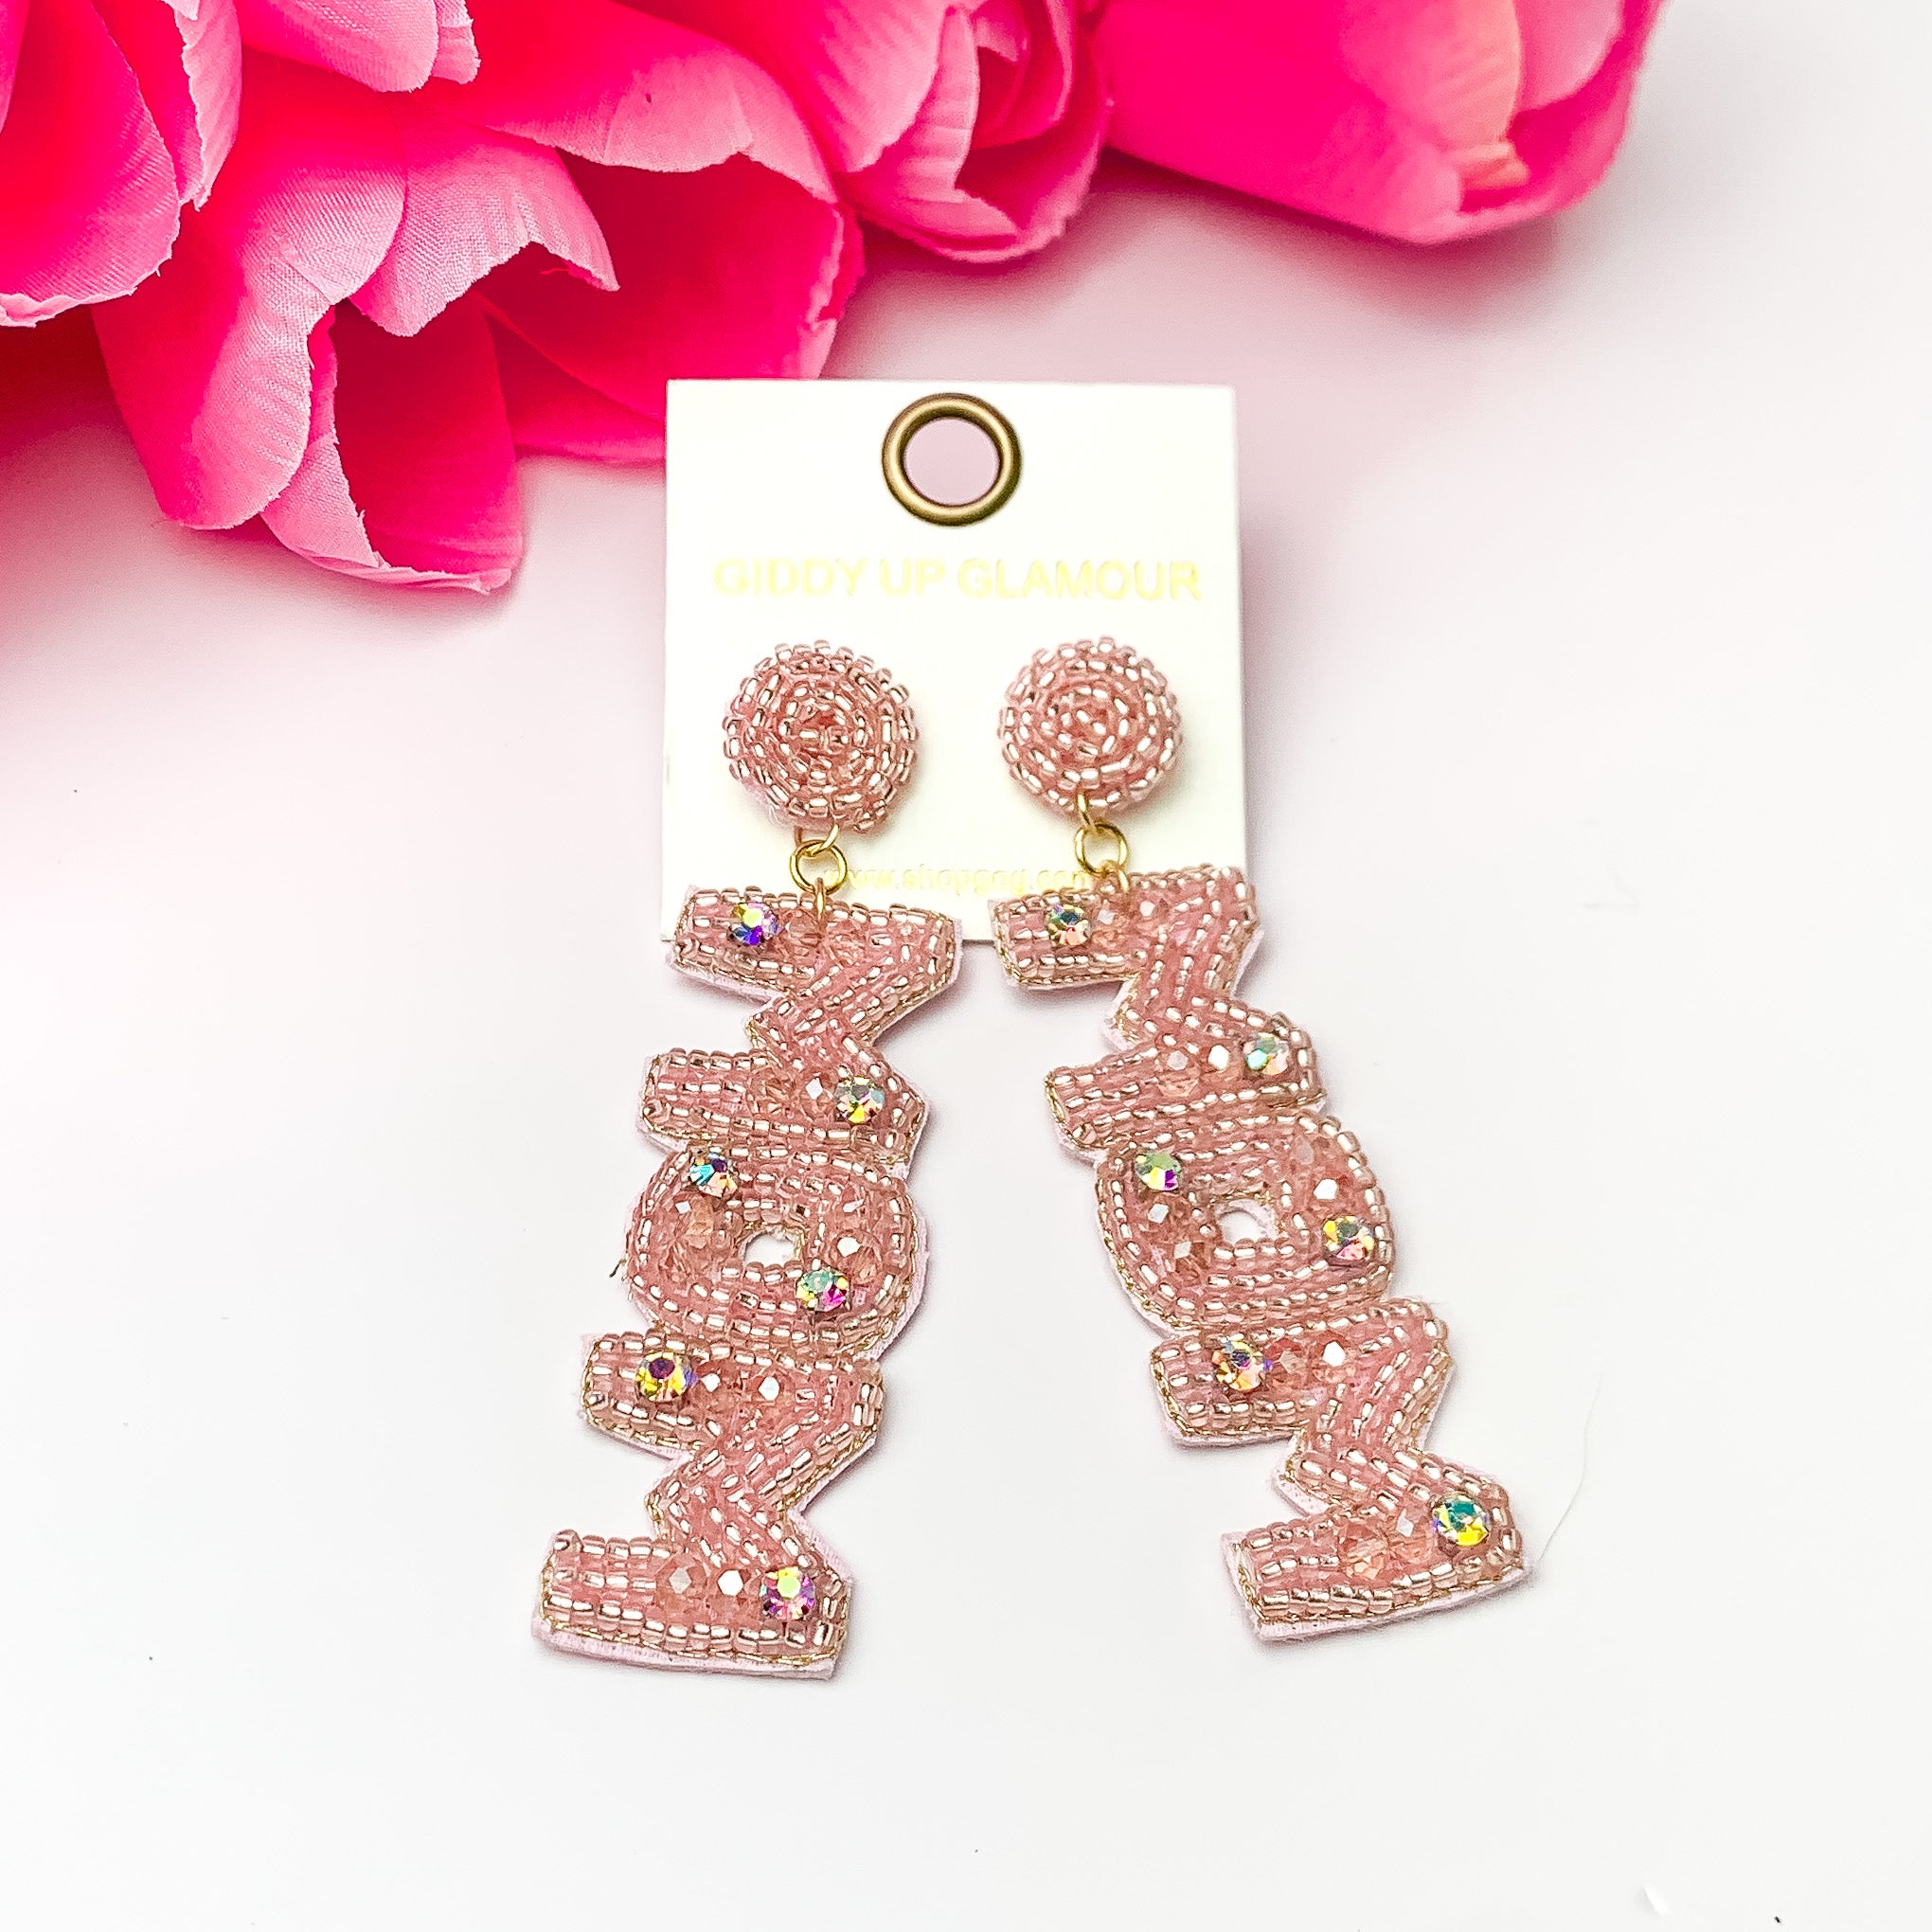 These earrings include rose pink, circle, beaded post back earrings with a long dangle. This dangle spells out "MOM" in rose pink beads with an inlay of ab crystals. These earrings are pictured on a white background with pink flowers.